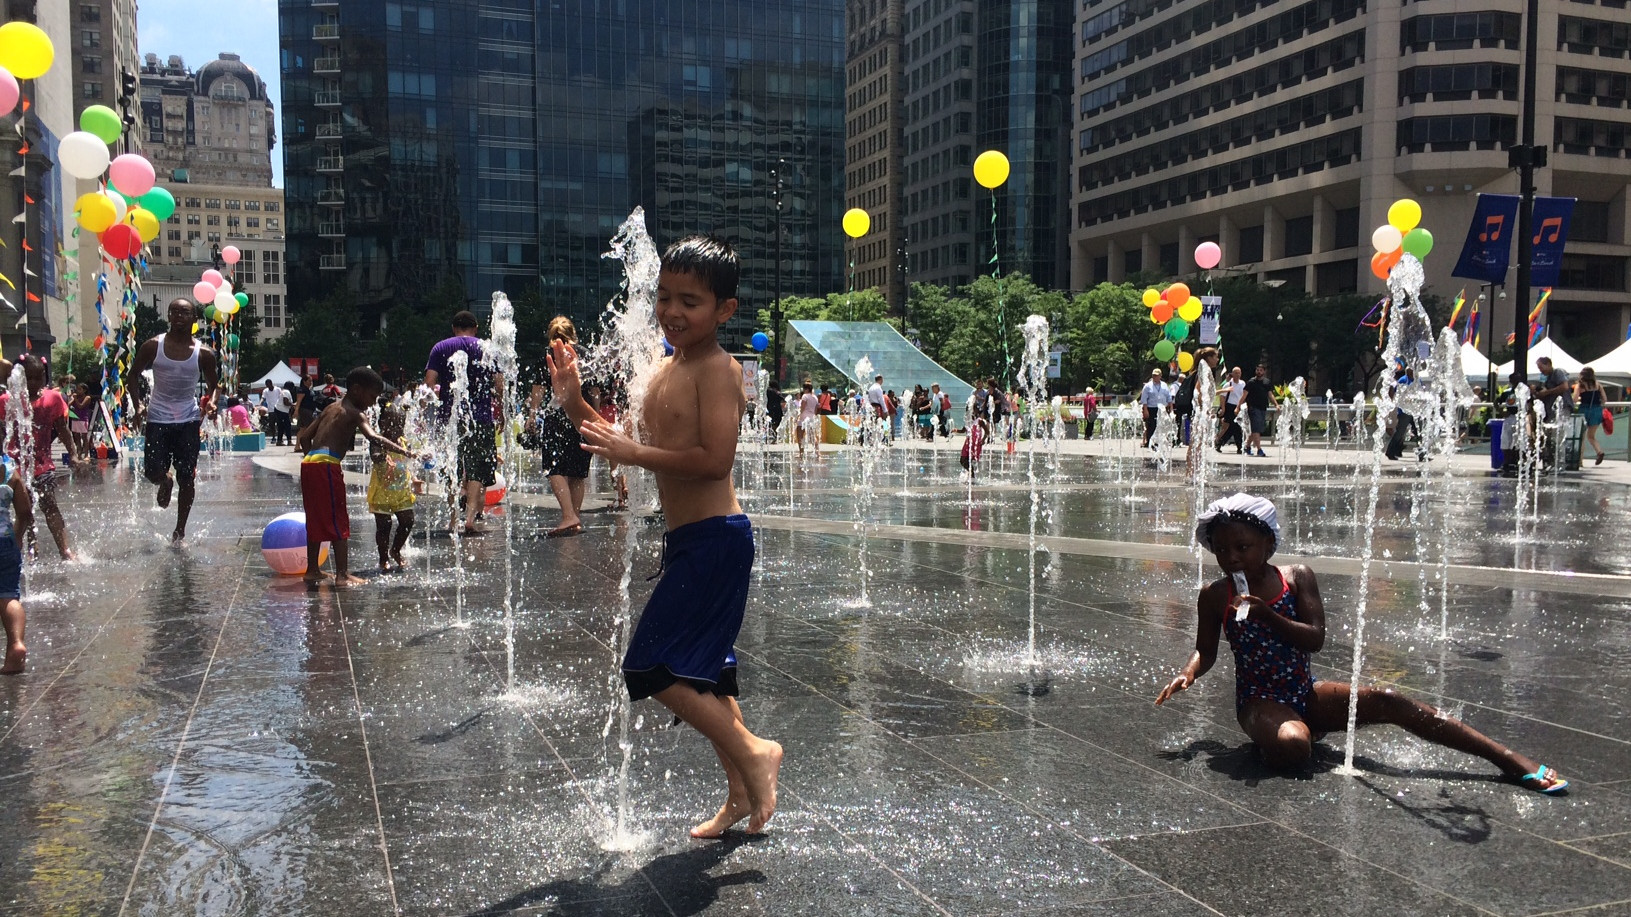 Children play in water fountains outside Philadelphia City Hall.